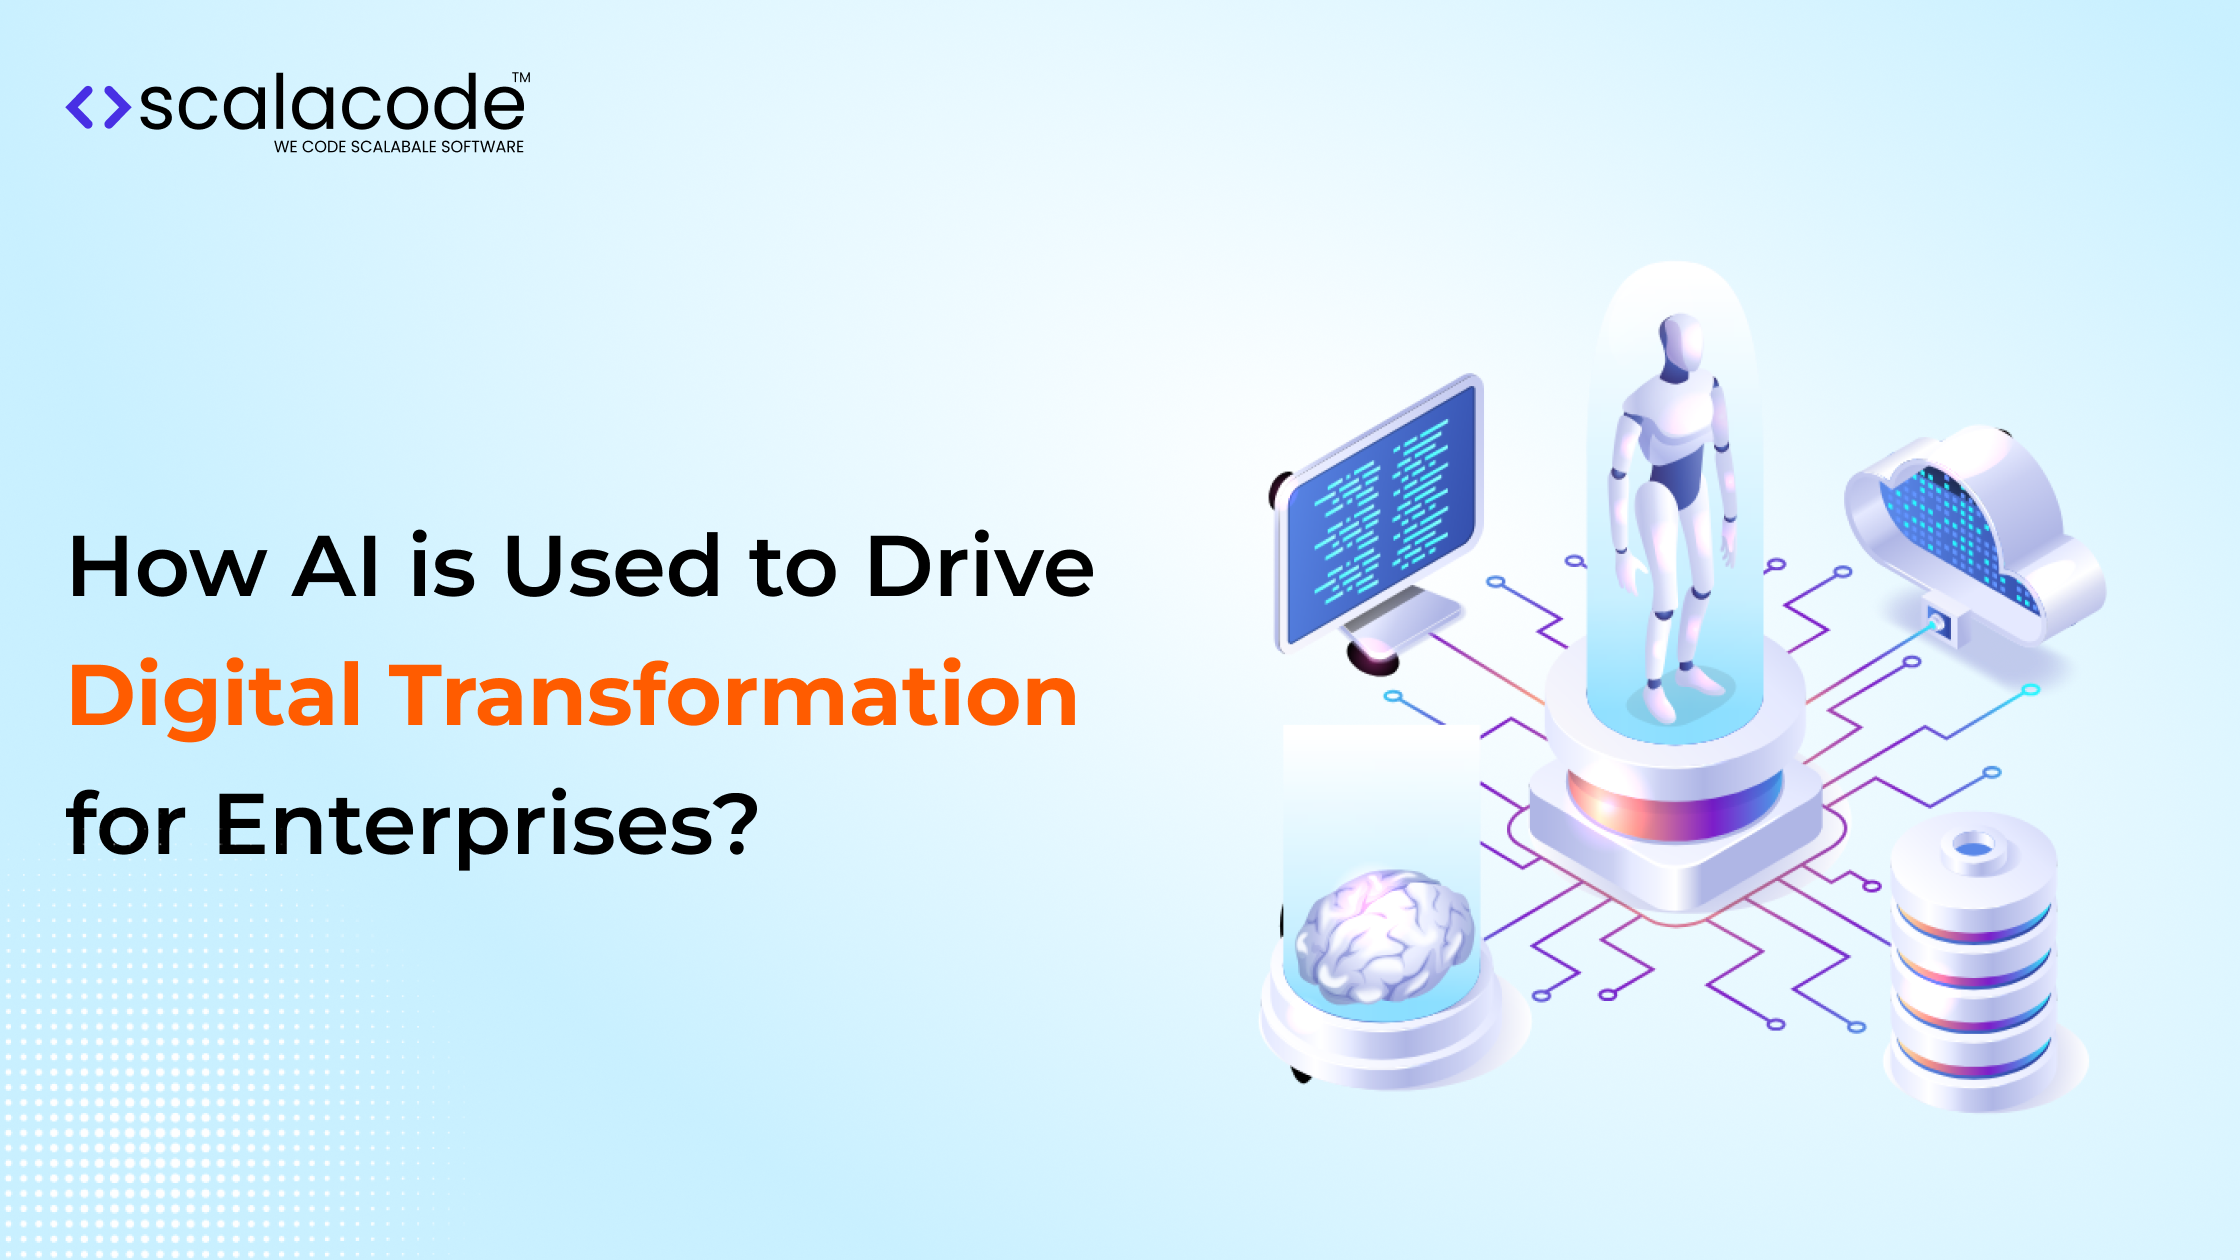 How AI is Used to Drive Digital Transformation for Enterprises?